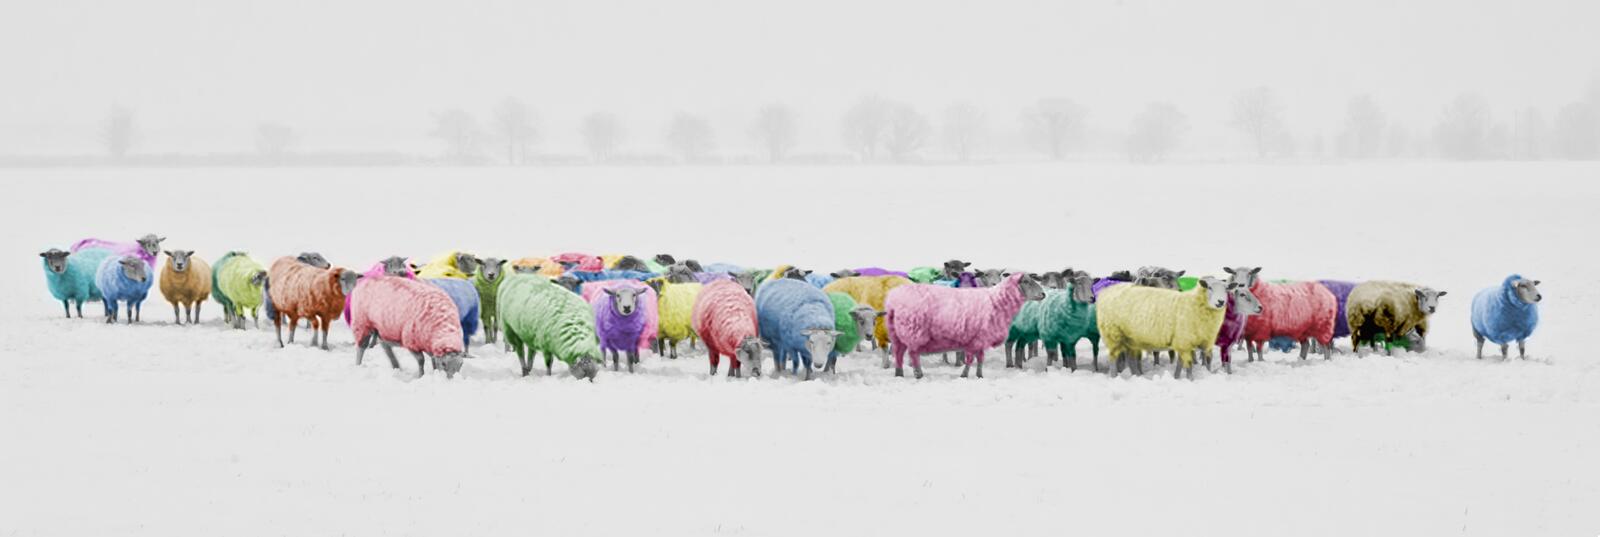 Free photo Colored rams in a winter field